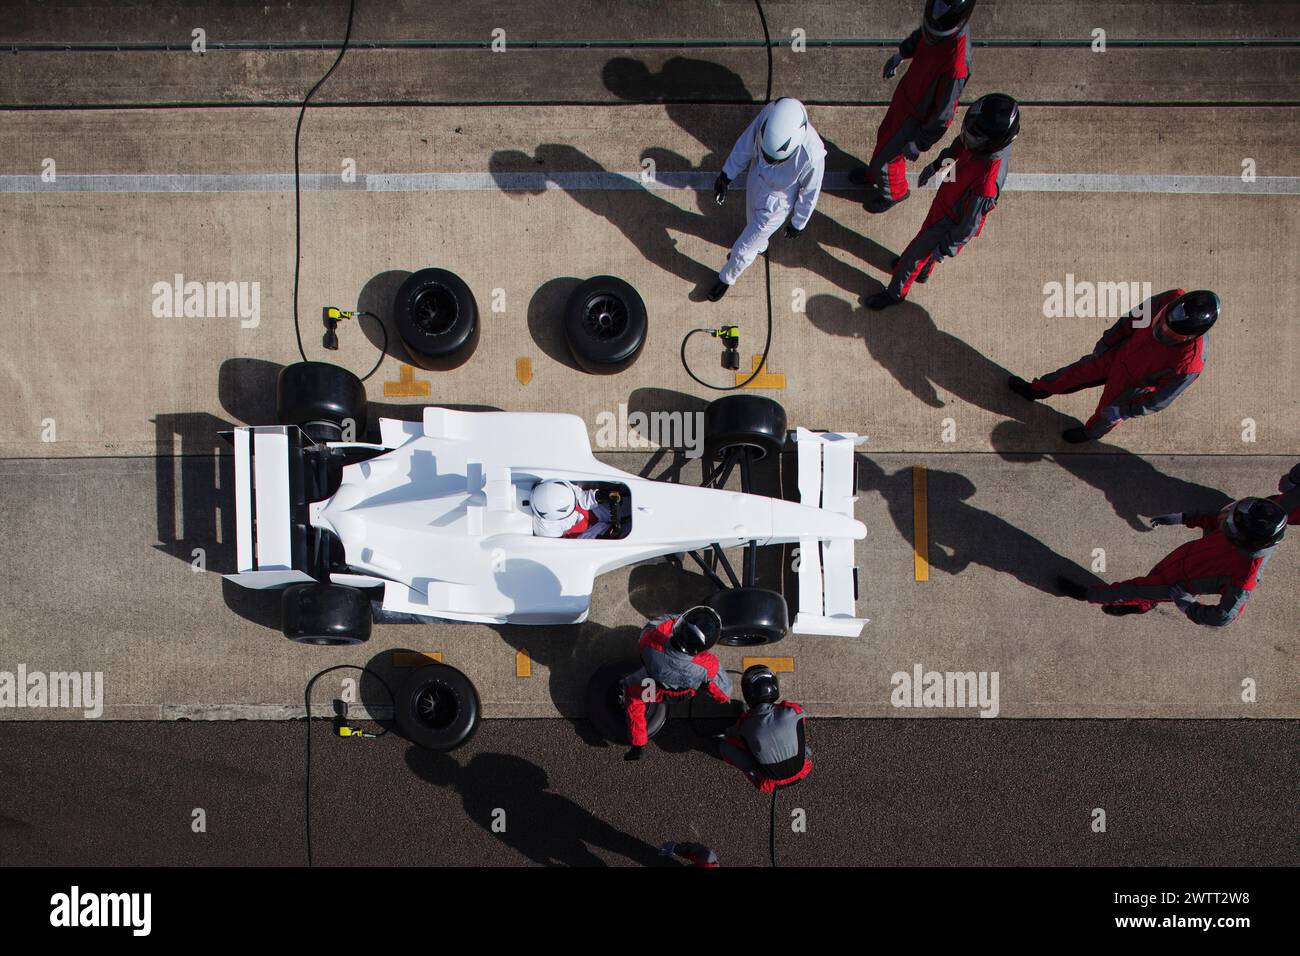 A topdown view of a pit stop in action during a sunny day at the race track. Stock Photo